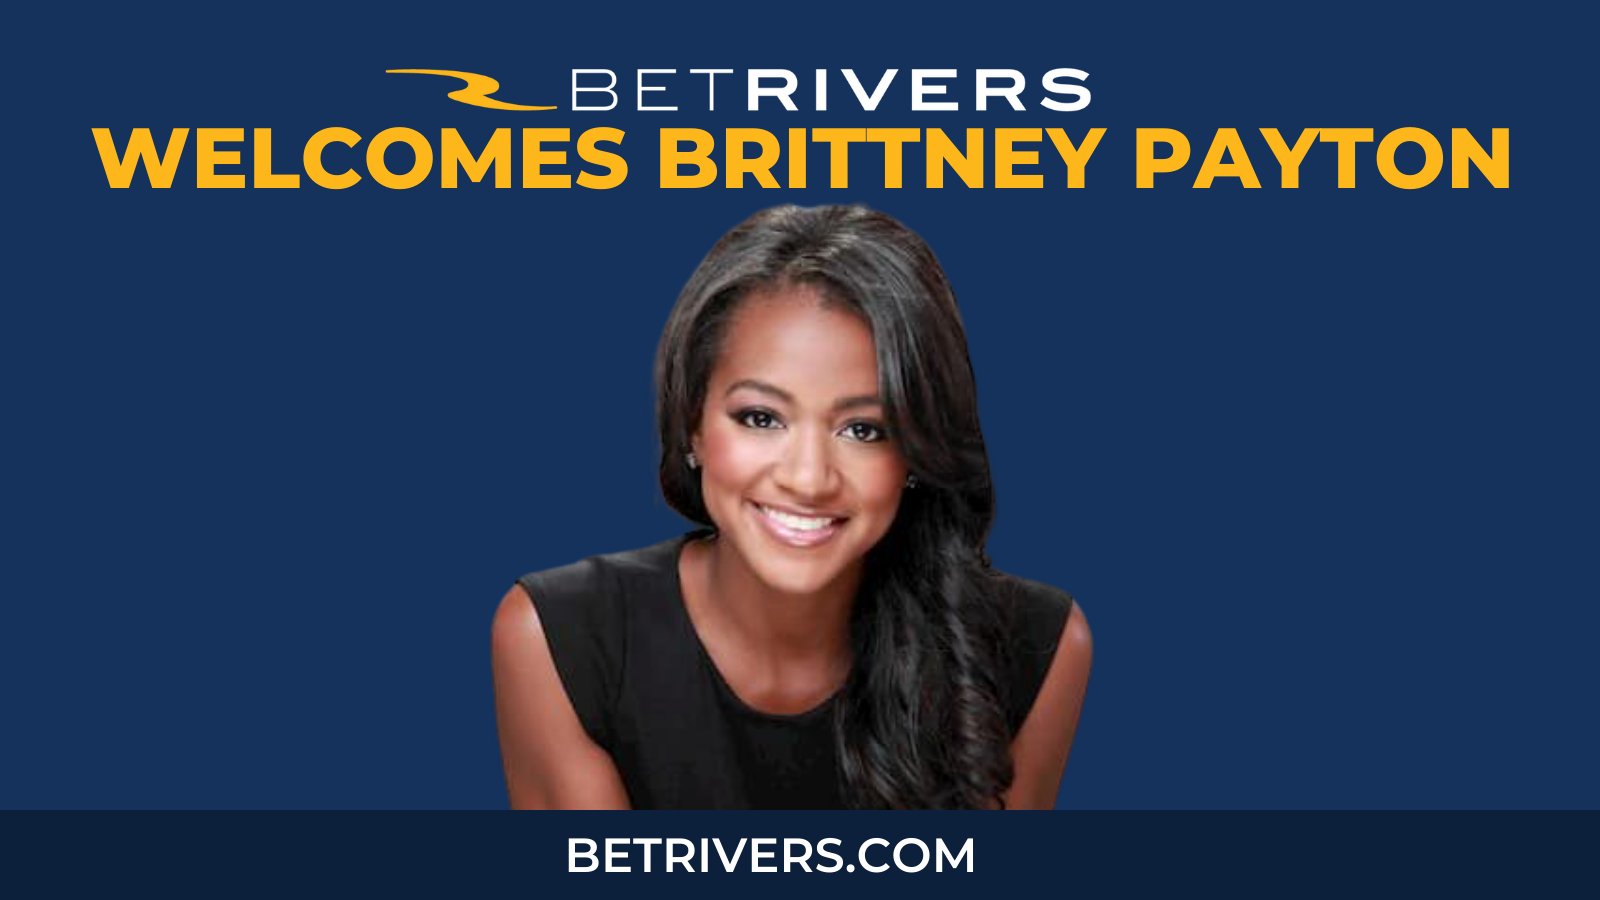 BetRivers Signs TV Personality Brittney Payton as Brand Ambassador for